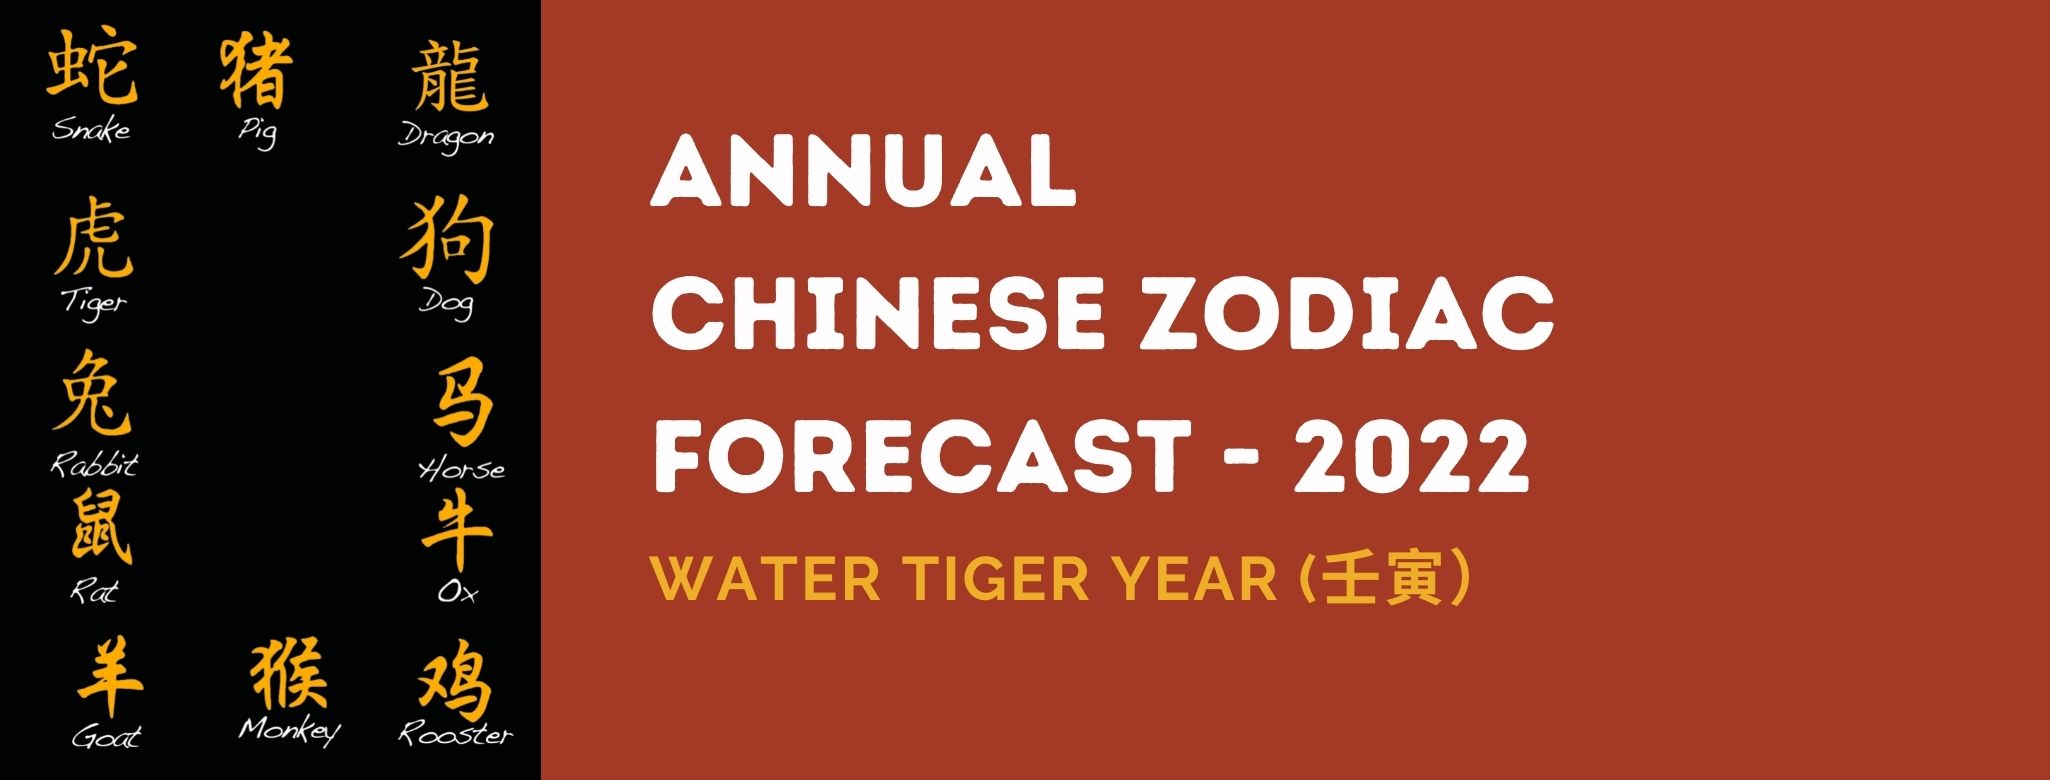 Annual Chinese Zodiac Forecast Water Tiger Year- 2022